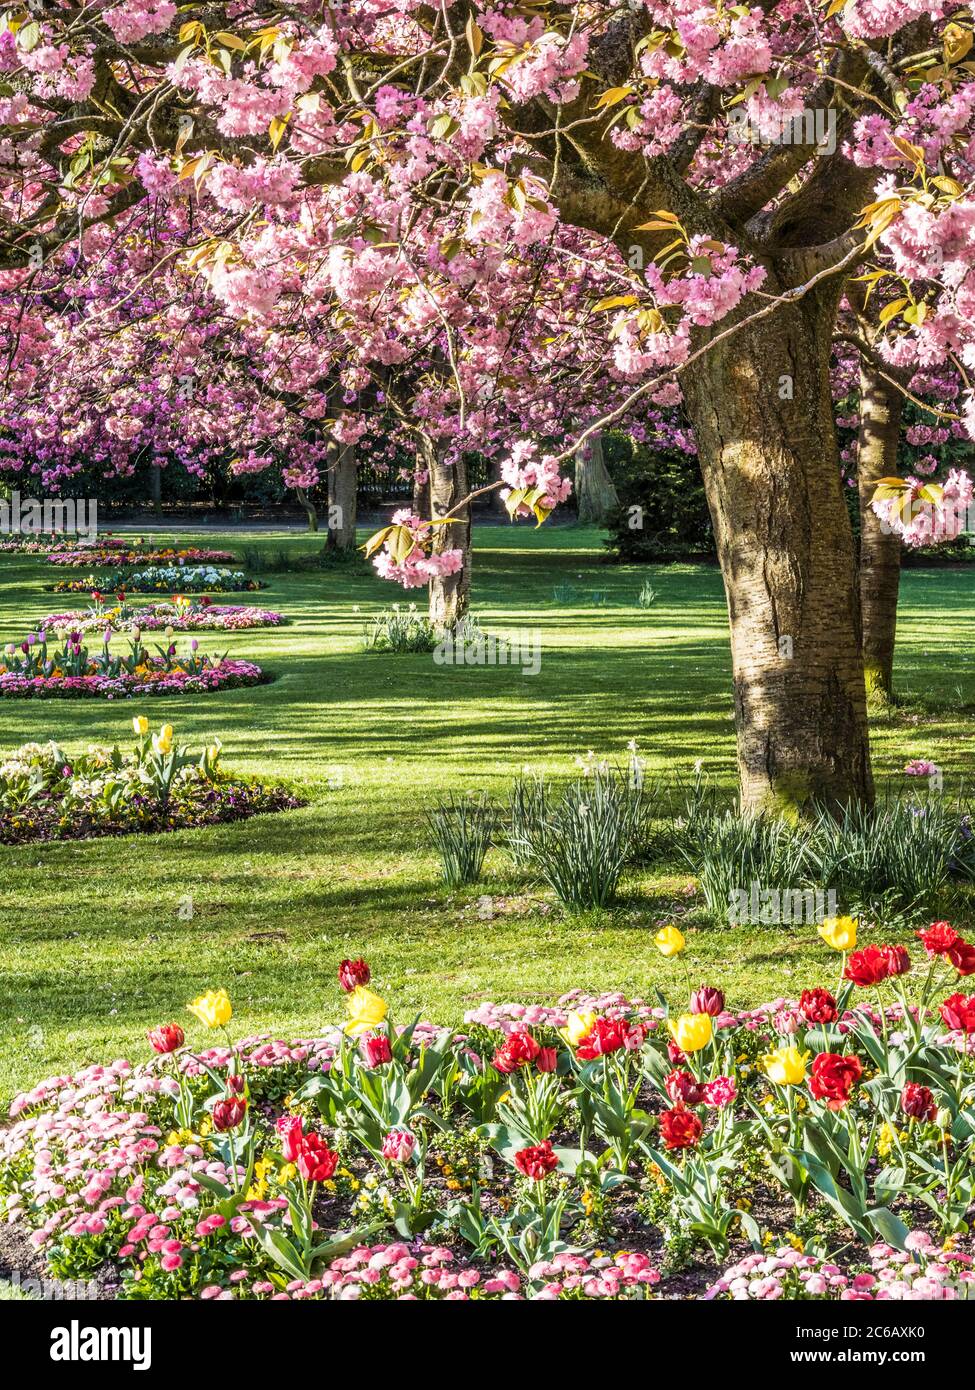 A bed of red and yellow parrot tulips and pink Bellis daisies with flowering pink cherry trees in the background in an urban public park in England. Stock Photo